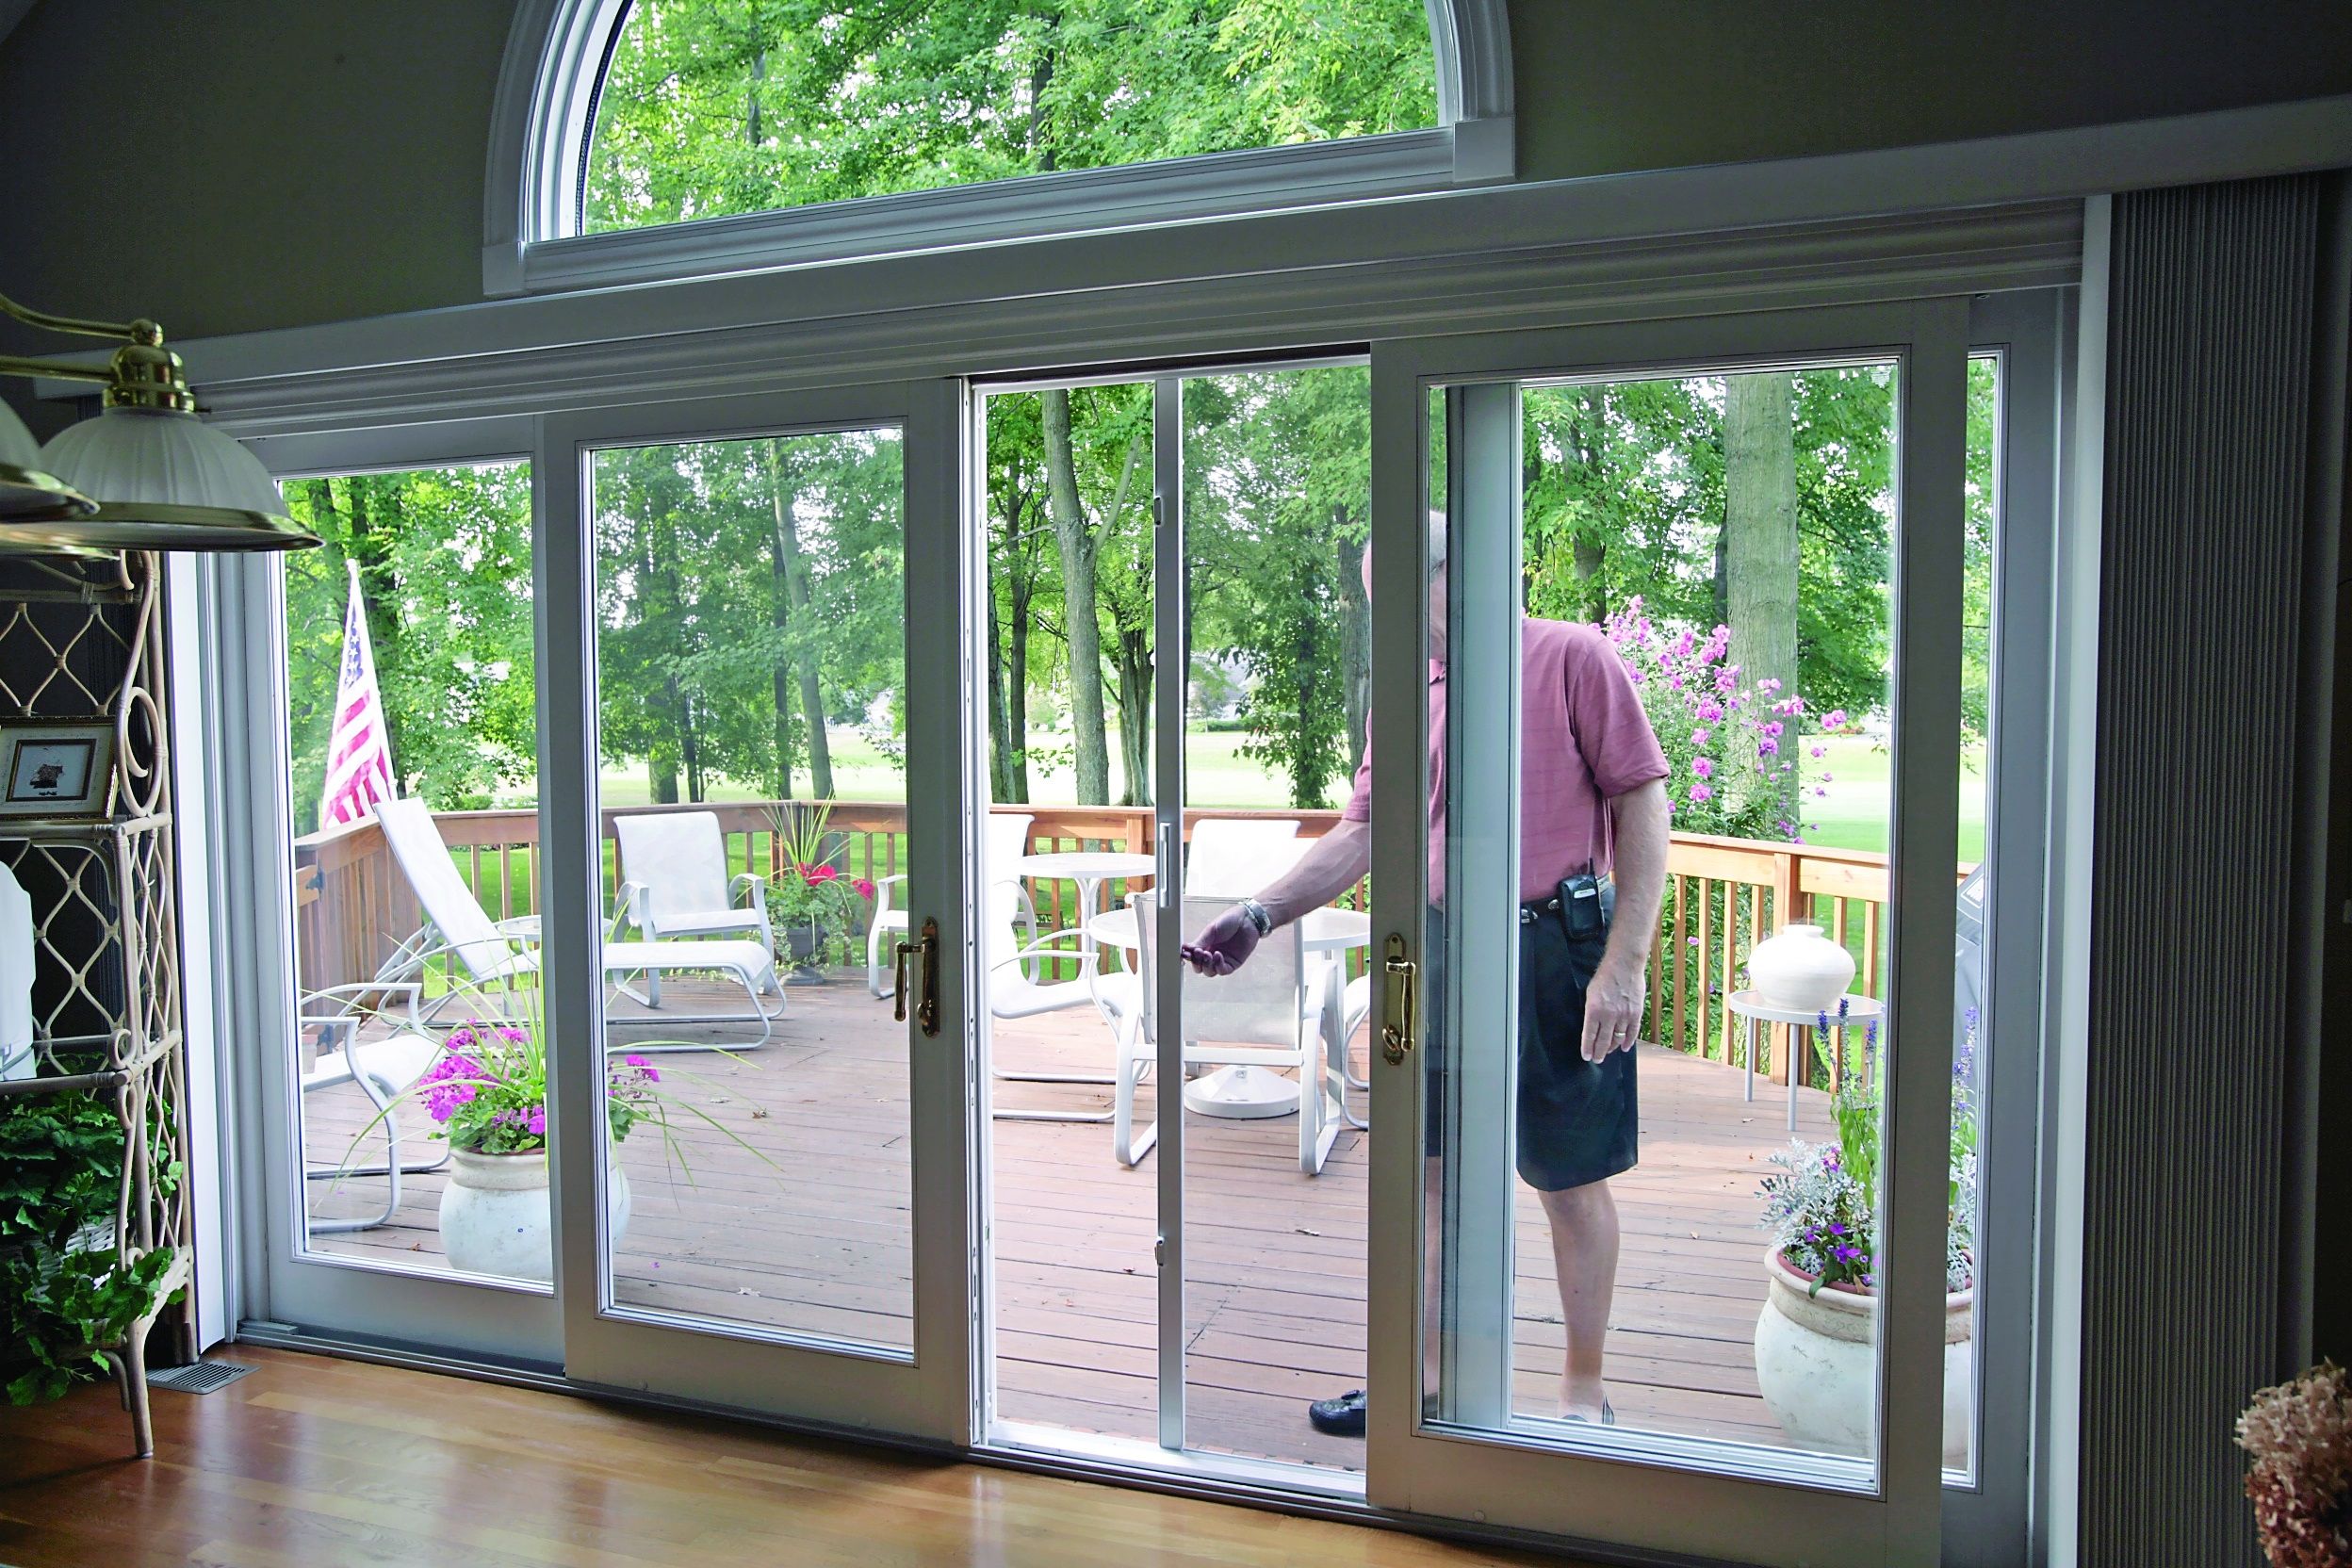 Buying Retractable Mesh Doors at the Lowest Price: check details